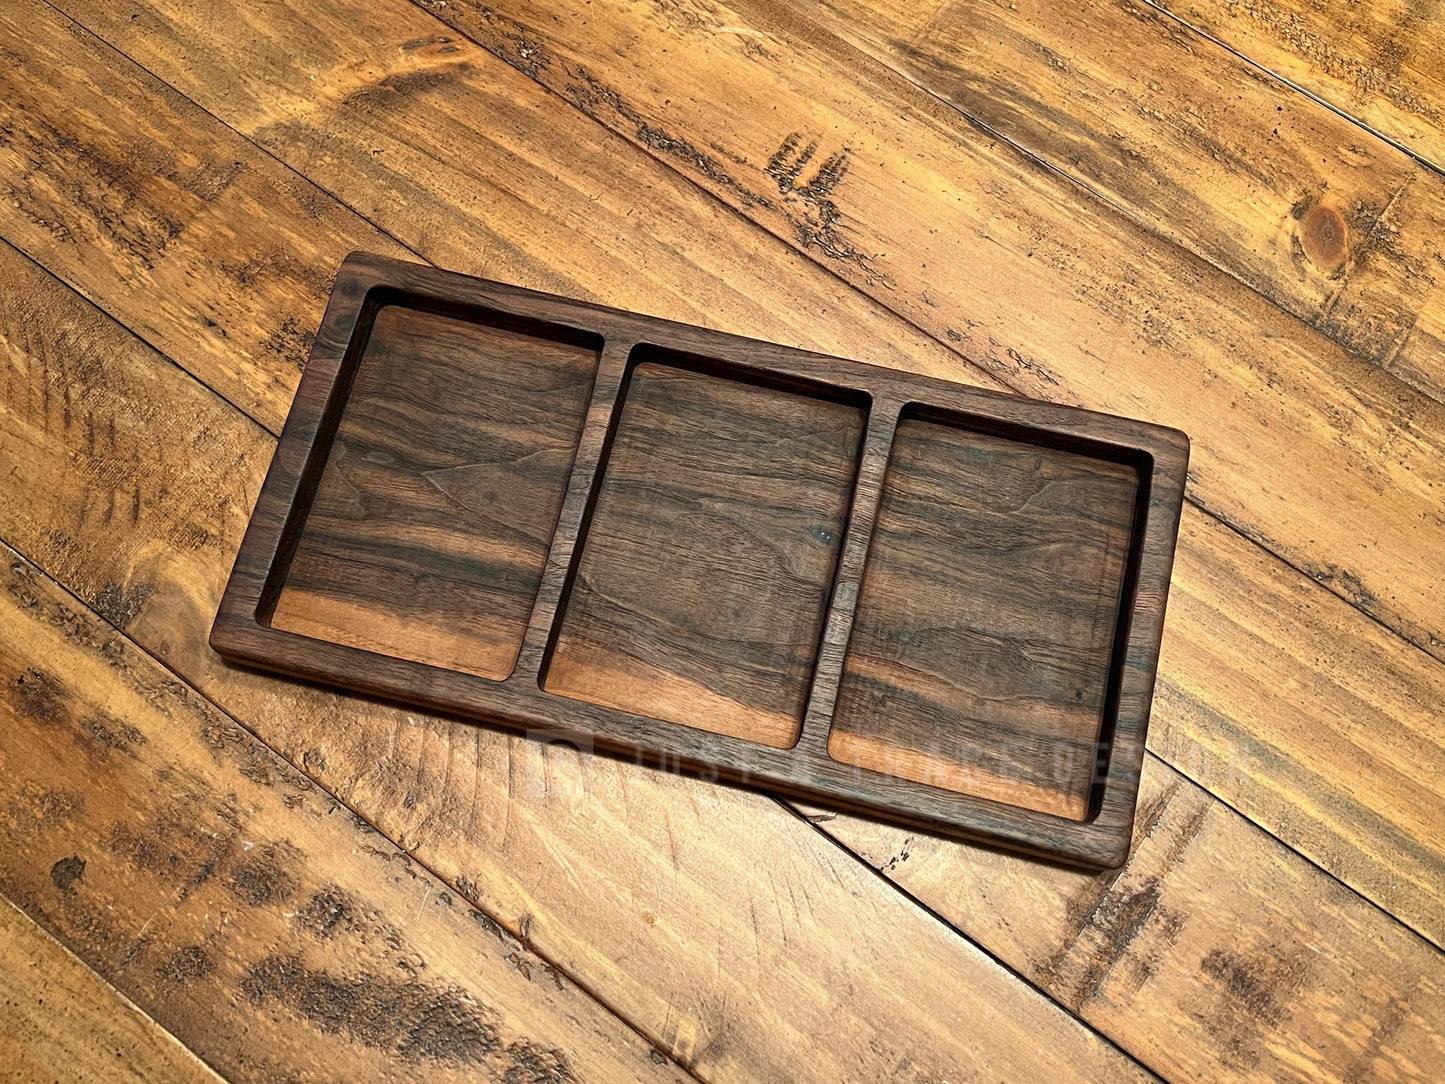 3 Section Wood Snack Tray, Appetizer Tray, Wood Platter, Serving Tray, Nut Dish, Candy Dish, Wedding Gift